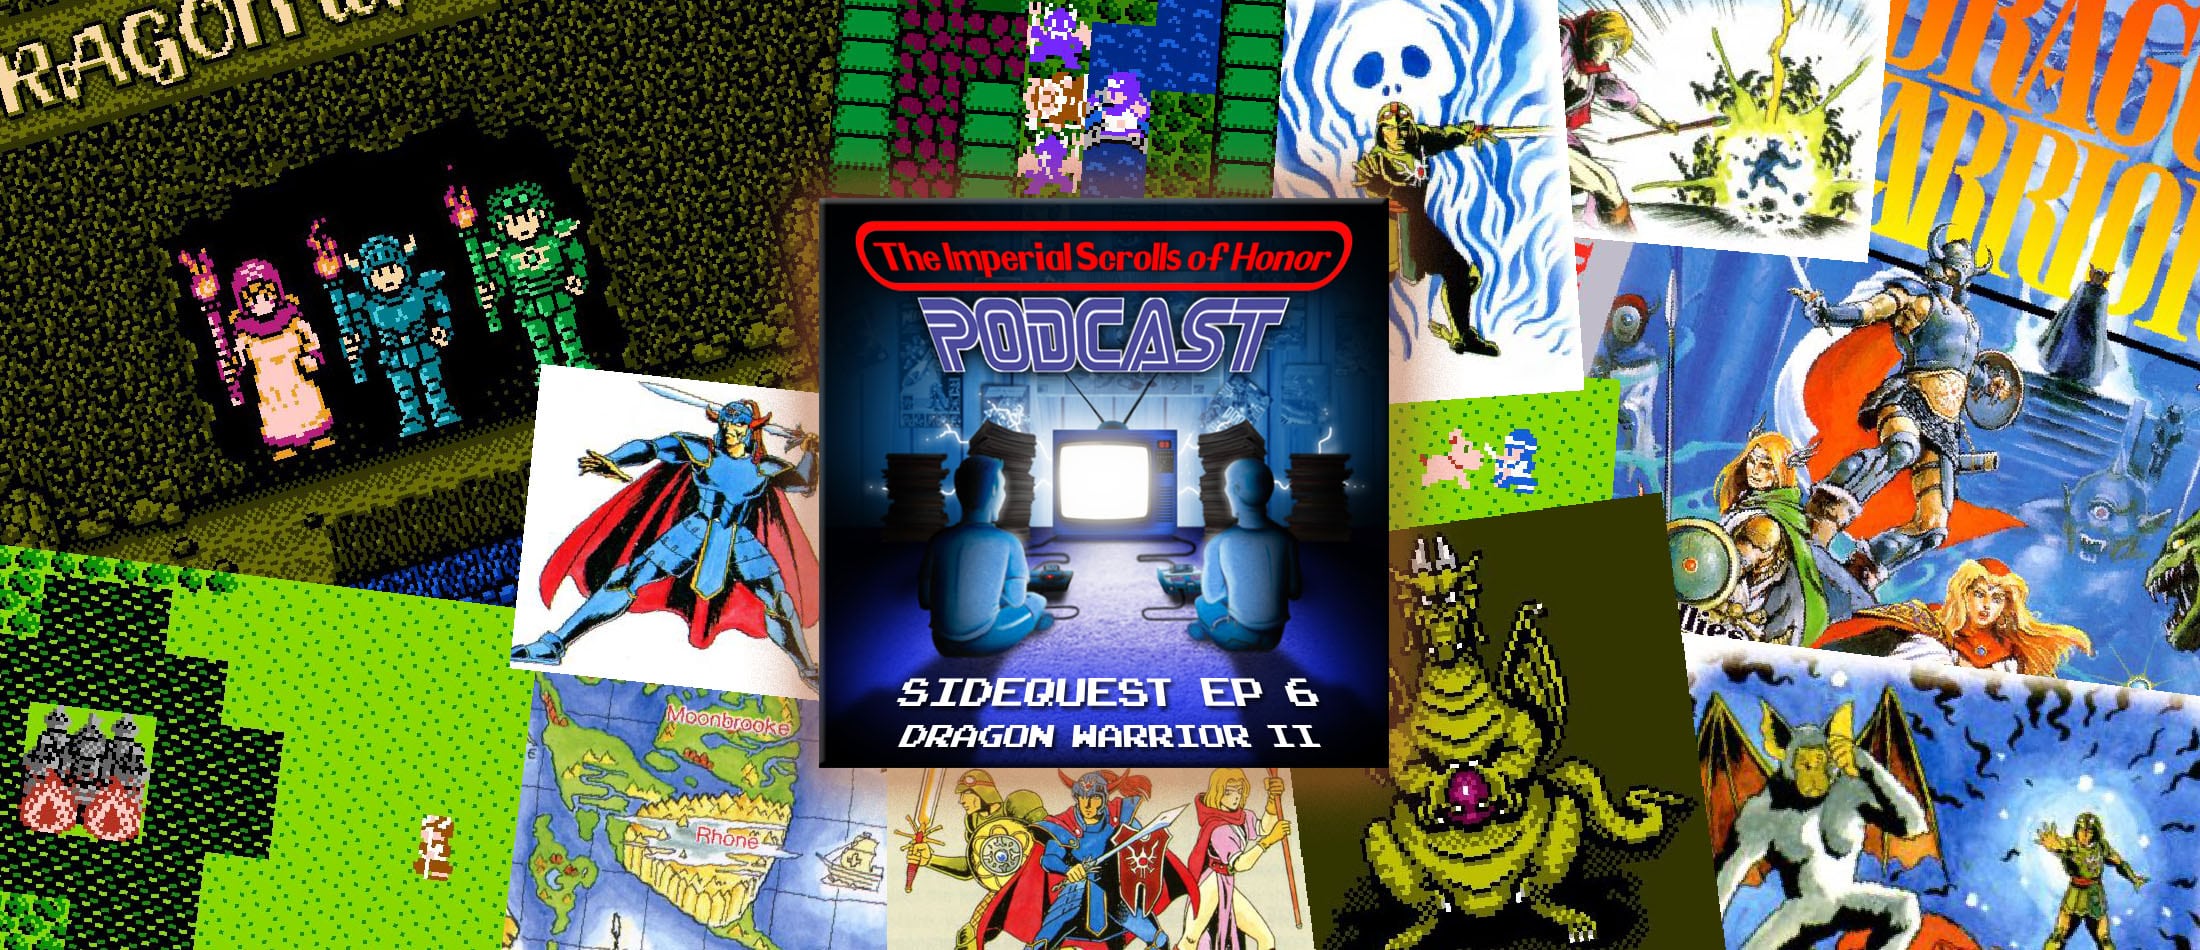 The Imperial Scrolls of Honor Podcast - SIDEQUEST: Dragon Warrior II Ep 6